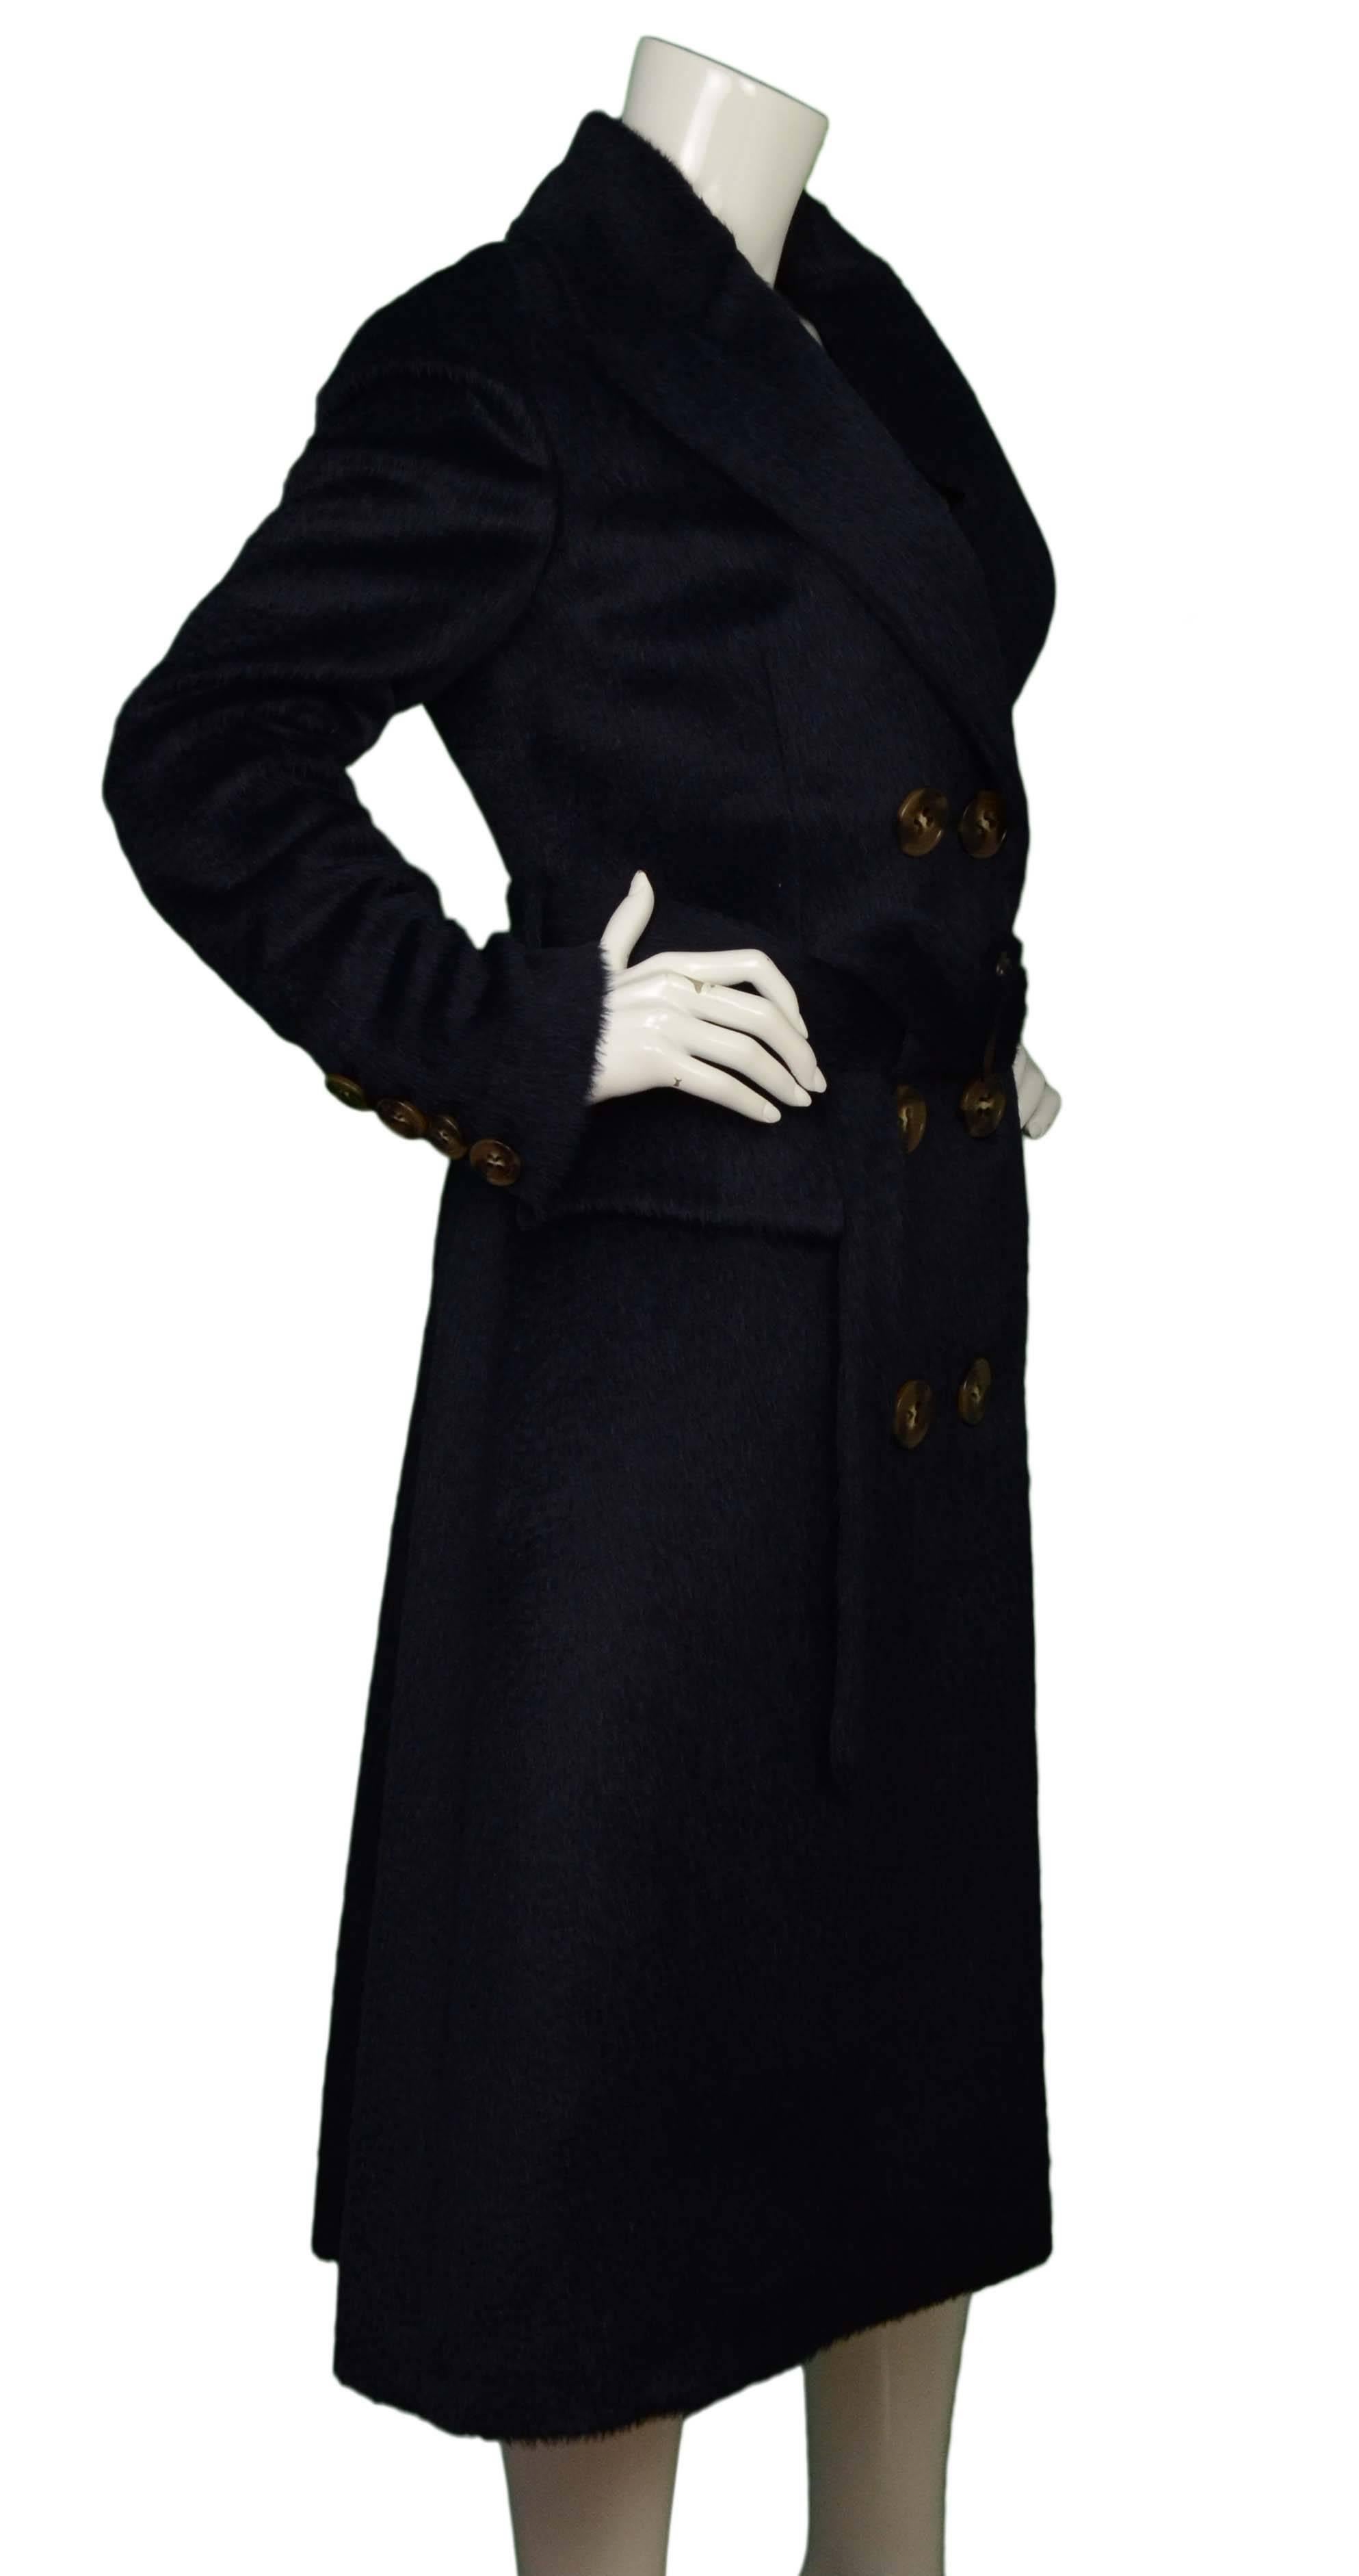 Burberry Prorsum Custom Midnight Blue Alpaca Long Coat 
Features optional waist belt
Made In: Italy
Year of Production: 2015
Color: Navy/Midnight blue
Composition: 72% alpaca, 28% wool
Lining: Black textile
Closure/Opening: Double breasted